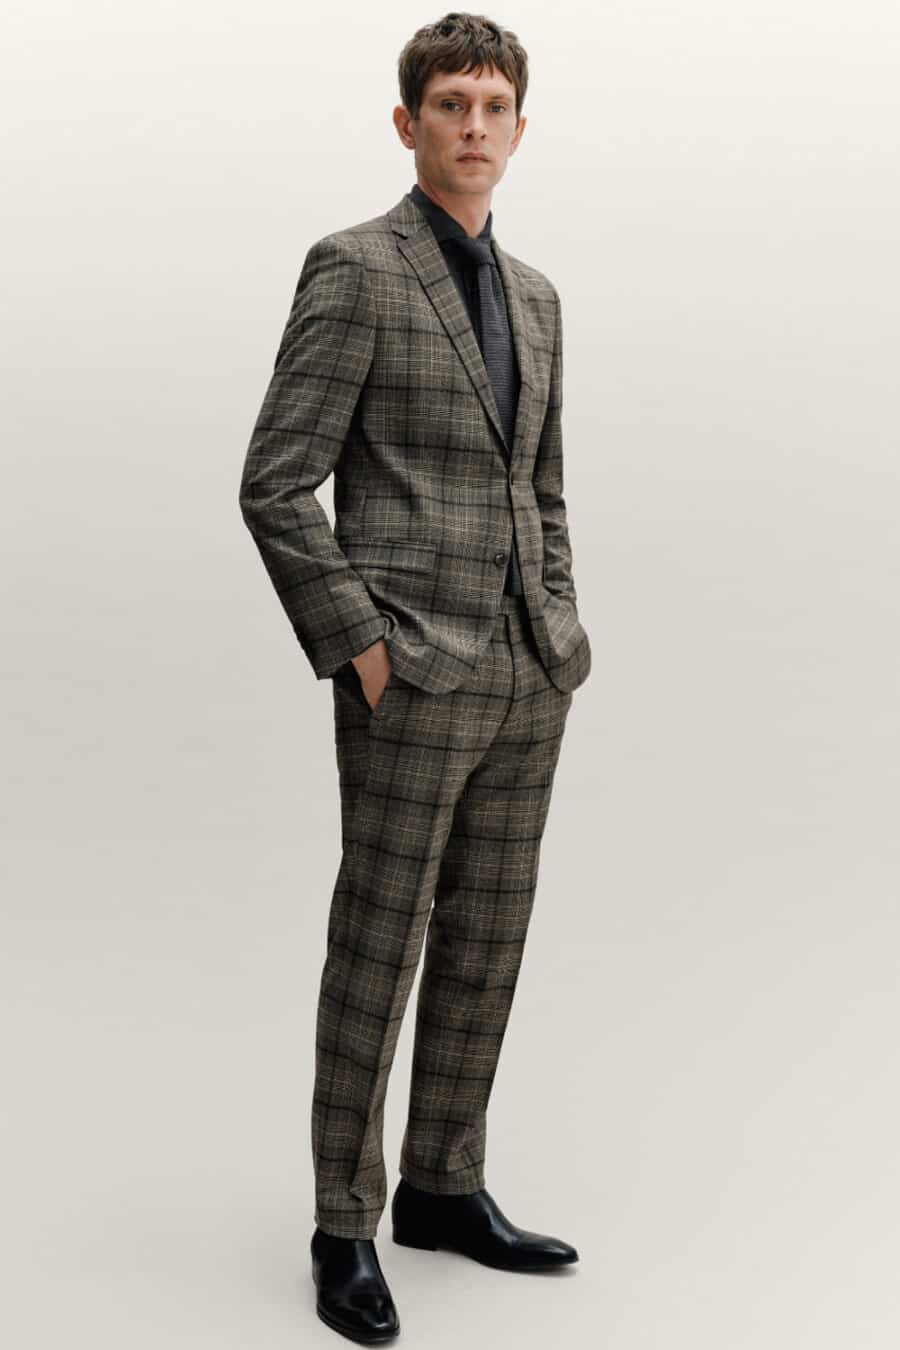 Men's grey and black check suit, black shirt, charcoal tie and black leather Chelsea boots outfit